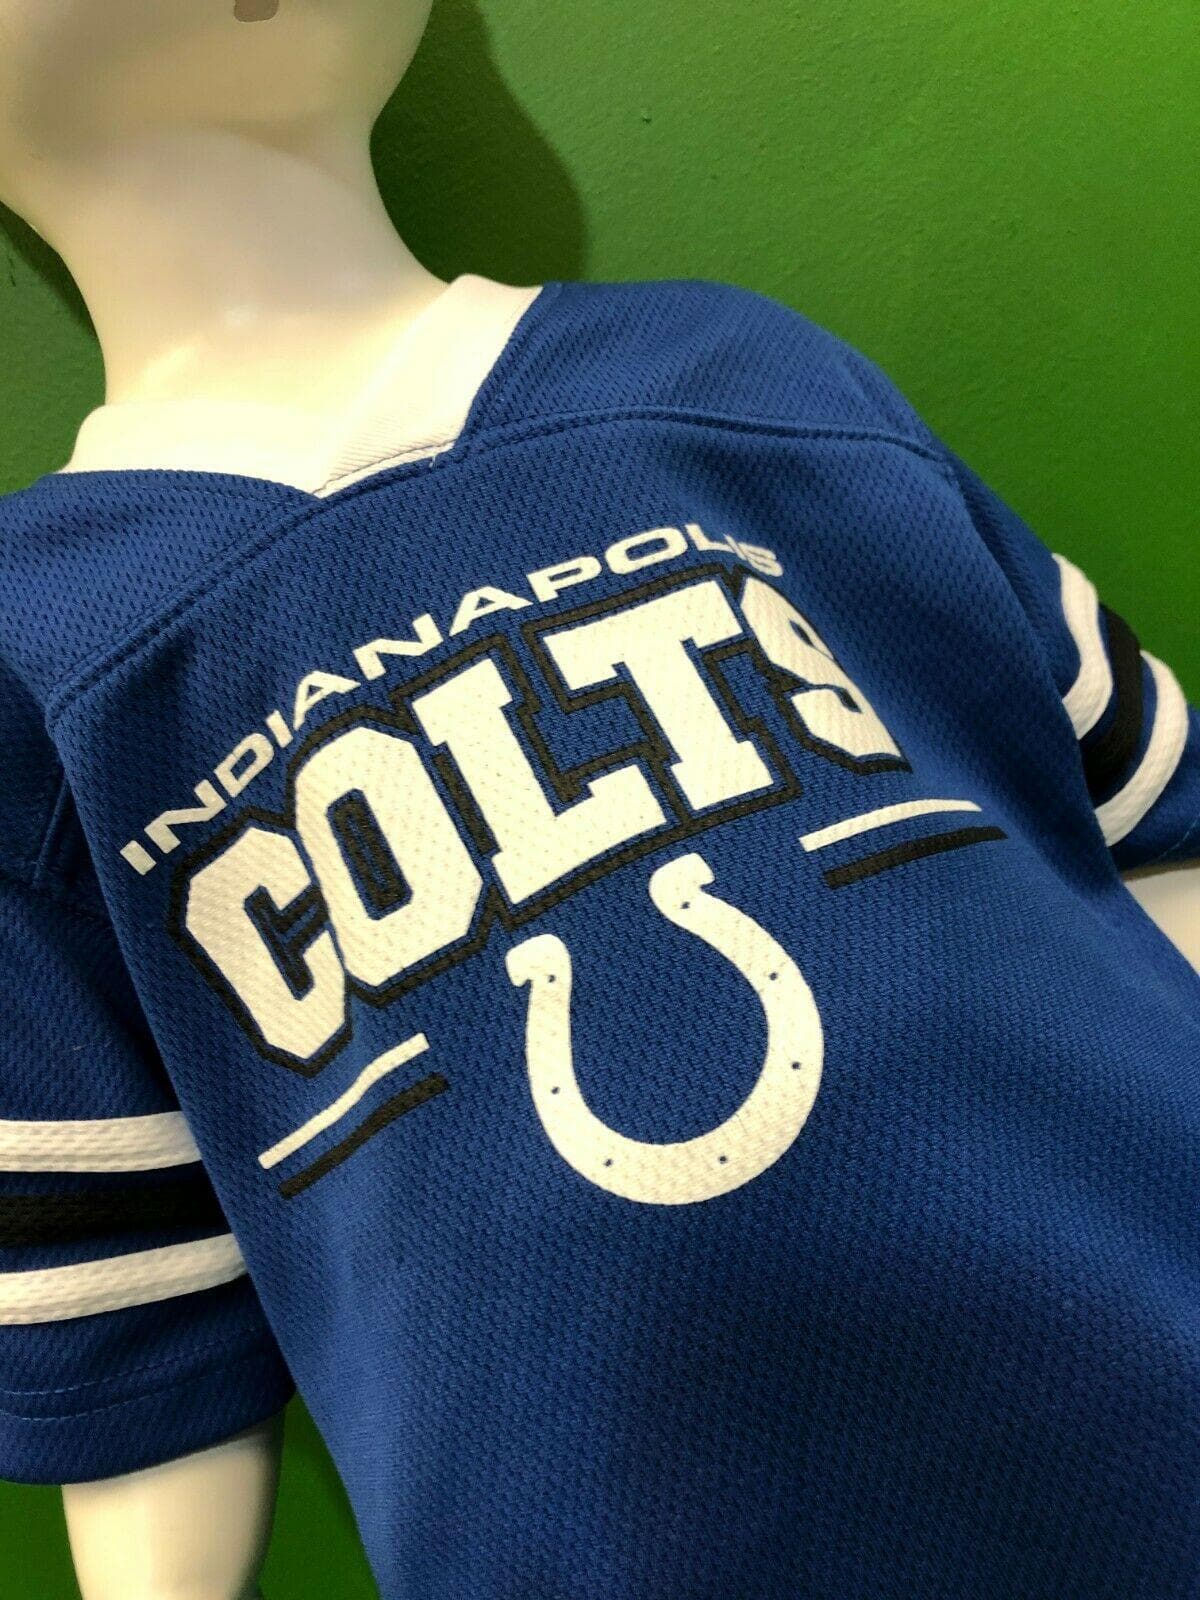 NFL Indianapolis Colts Jersey-Style Top Toddler 24 months